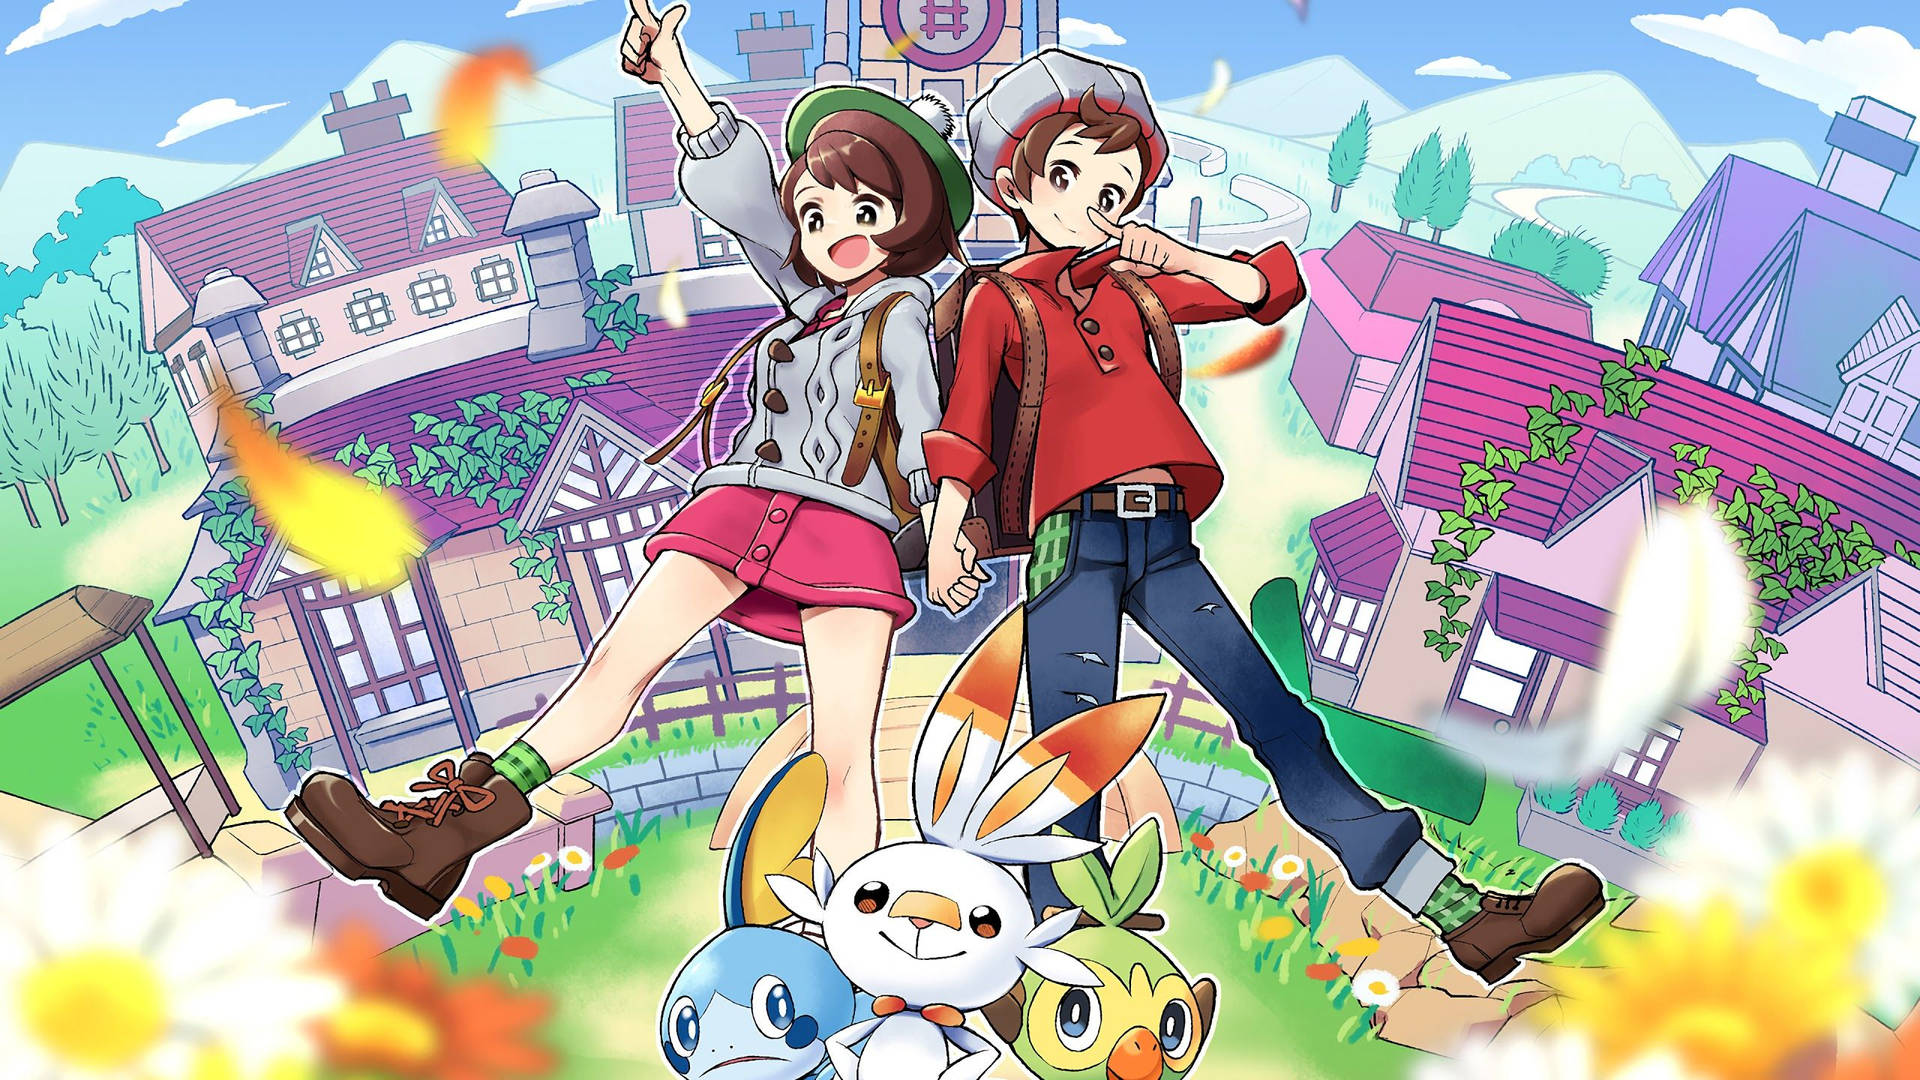 Trainer Ash Ketchum exploring the Galar region with his Pokémons in Pokemon Sword and Shield Wallpaper